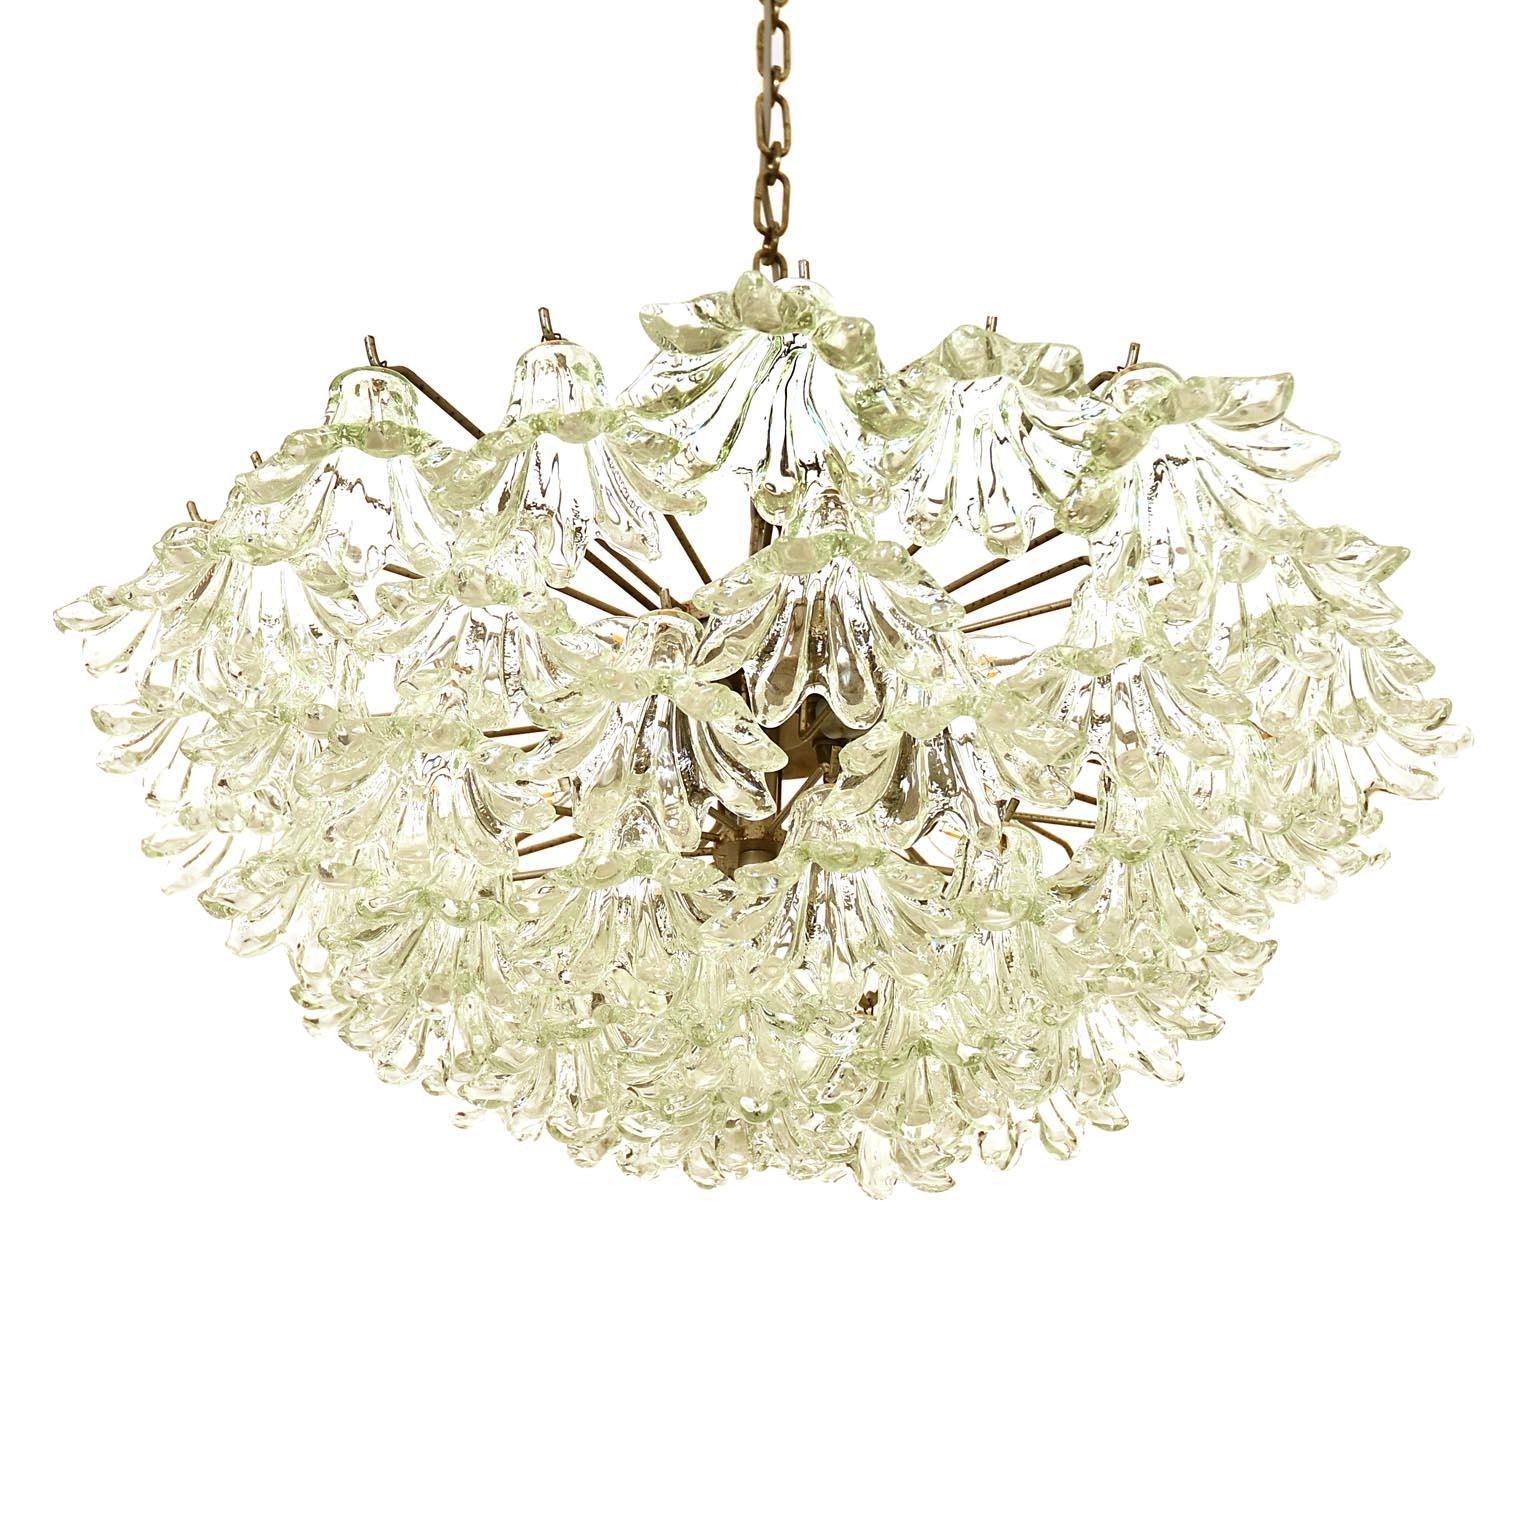 Italian Mid-Century Chandelier with Glass Blossoms, 1955, Murano In Good Condition For Sale In Vienna, AT